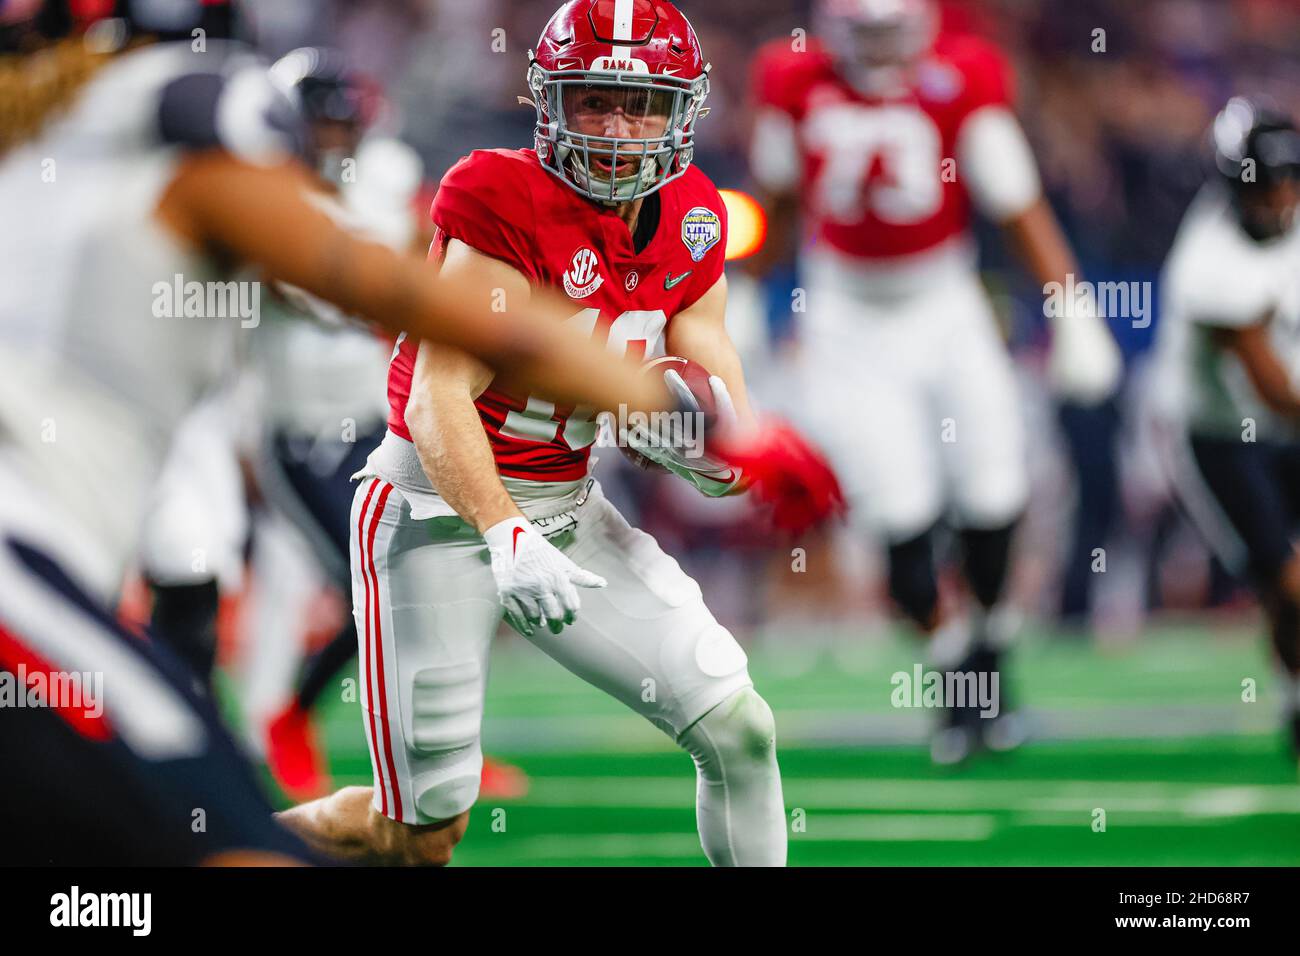 Alabama Crimson Tide wide receiver Slade Bolden (18) carries the ball for a touchdown in the first quarter of the  NCAA college football game against Stock Photo